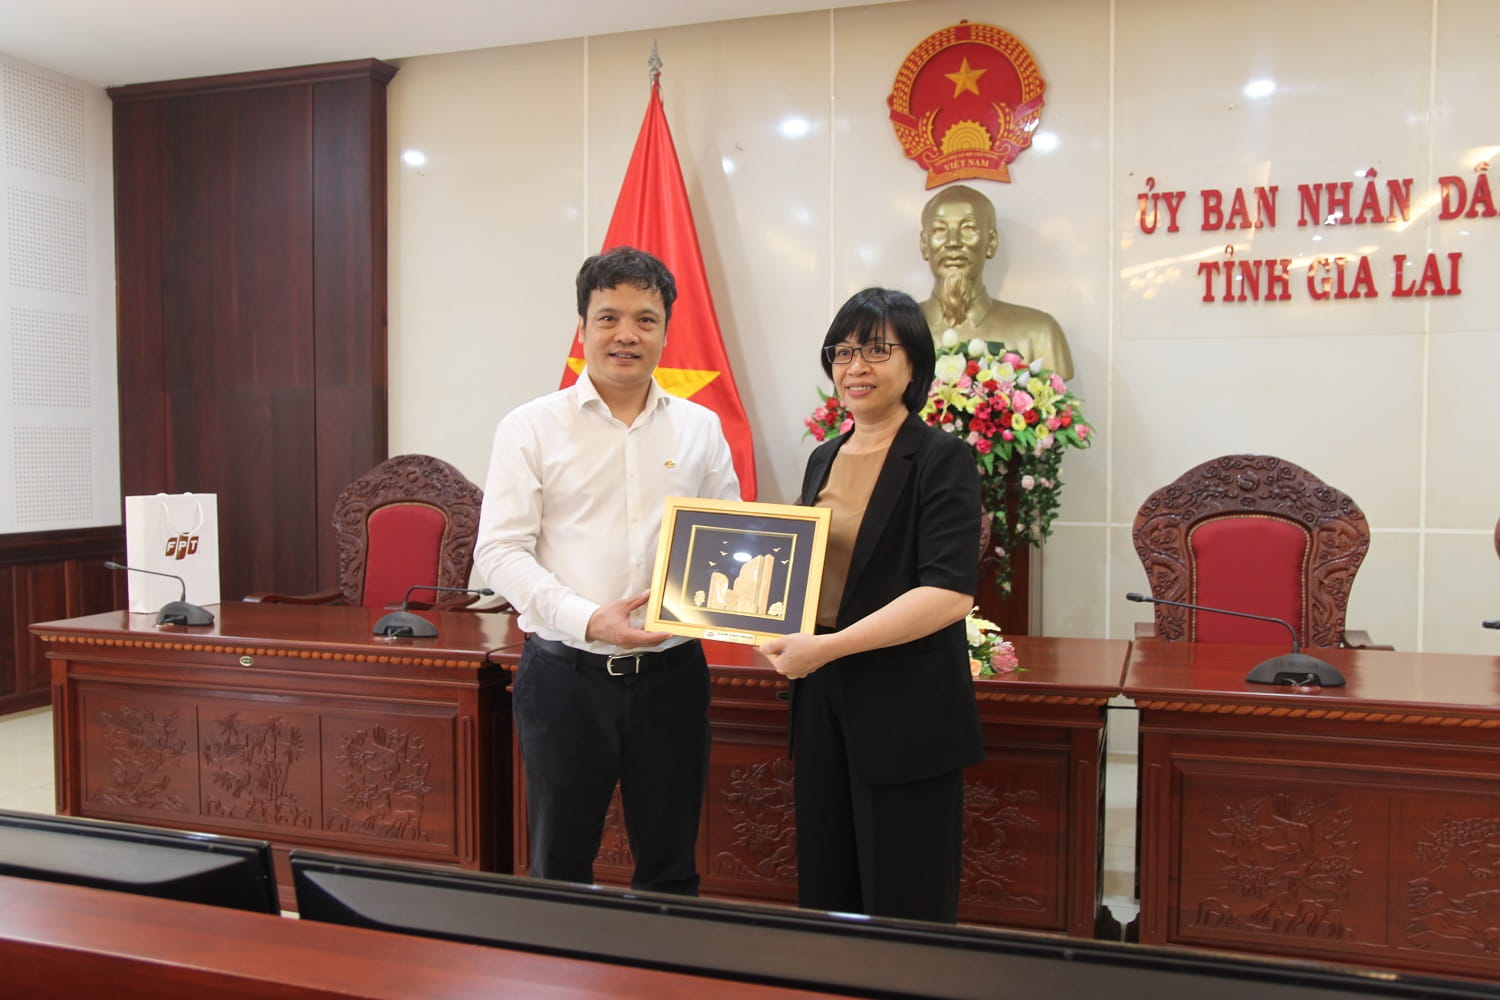 The CEO of FPT presented a gift to the Vice Chairman of the People's Committee of Gia Lai province